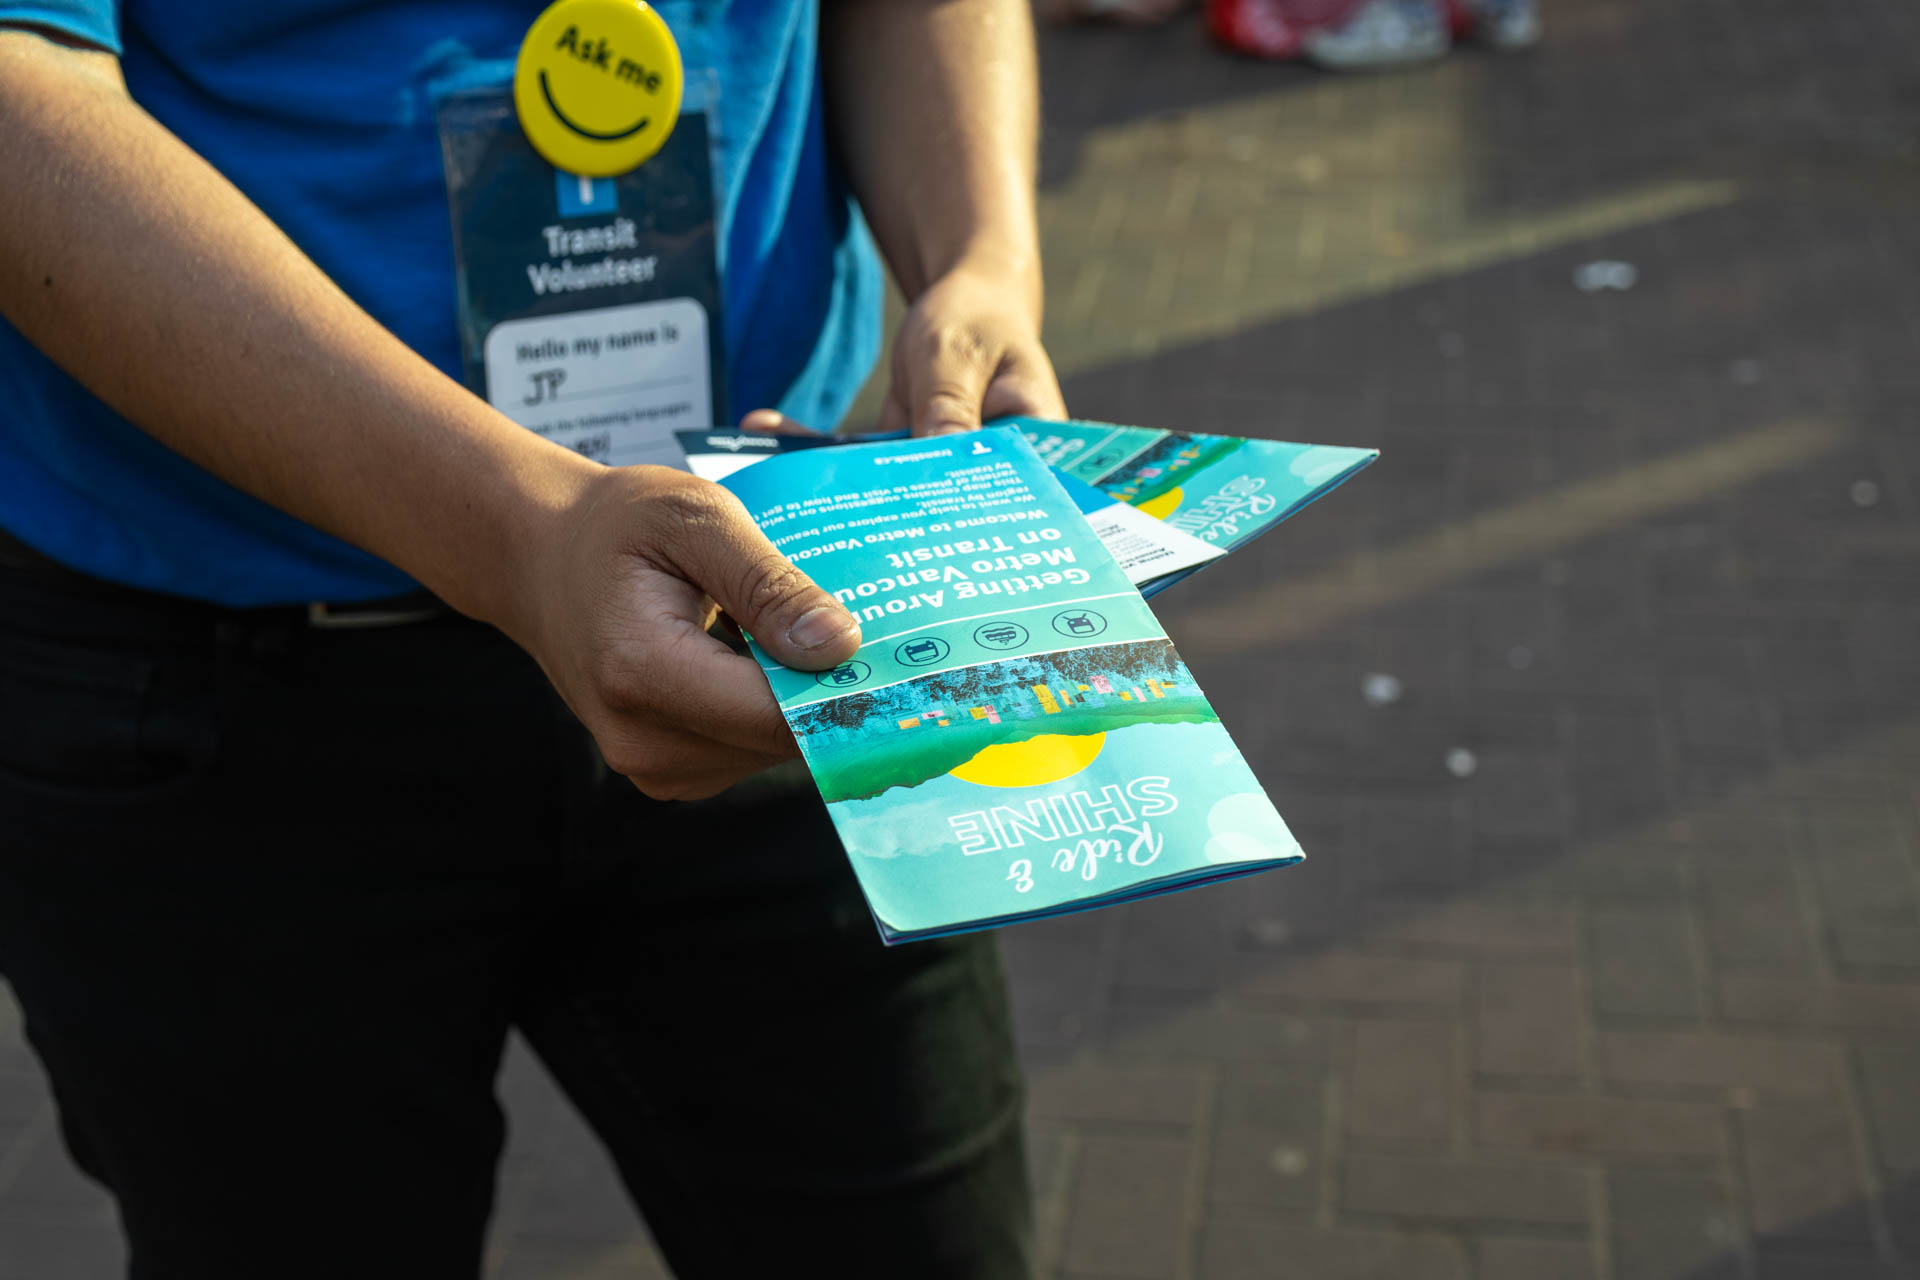 TransLink Volunteer holds out brochure of Ride & Shine campaign